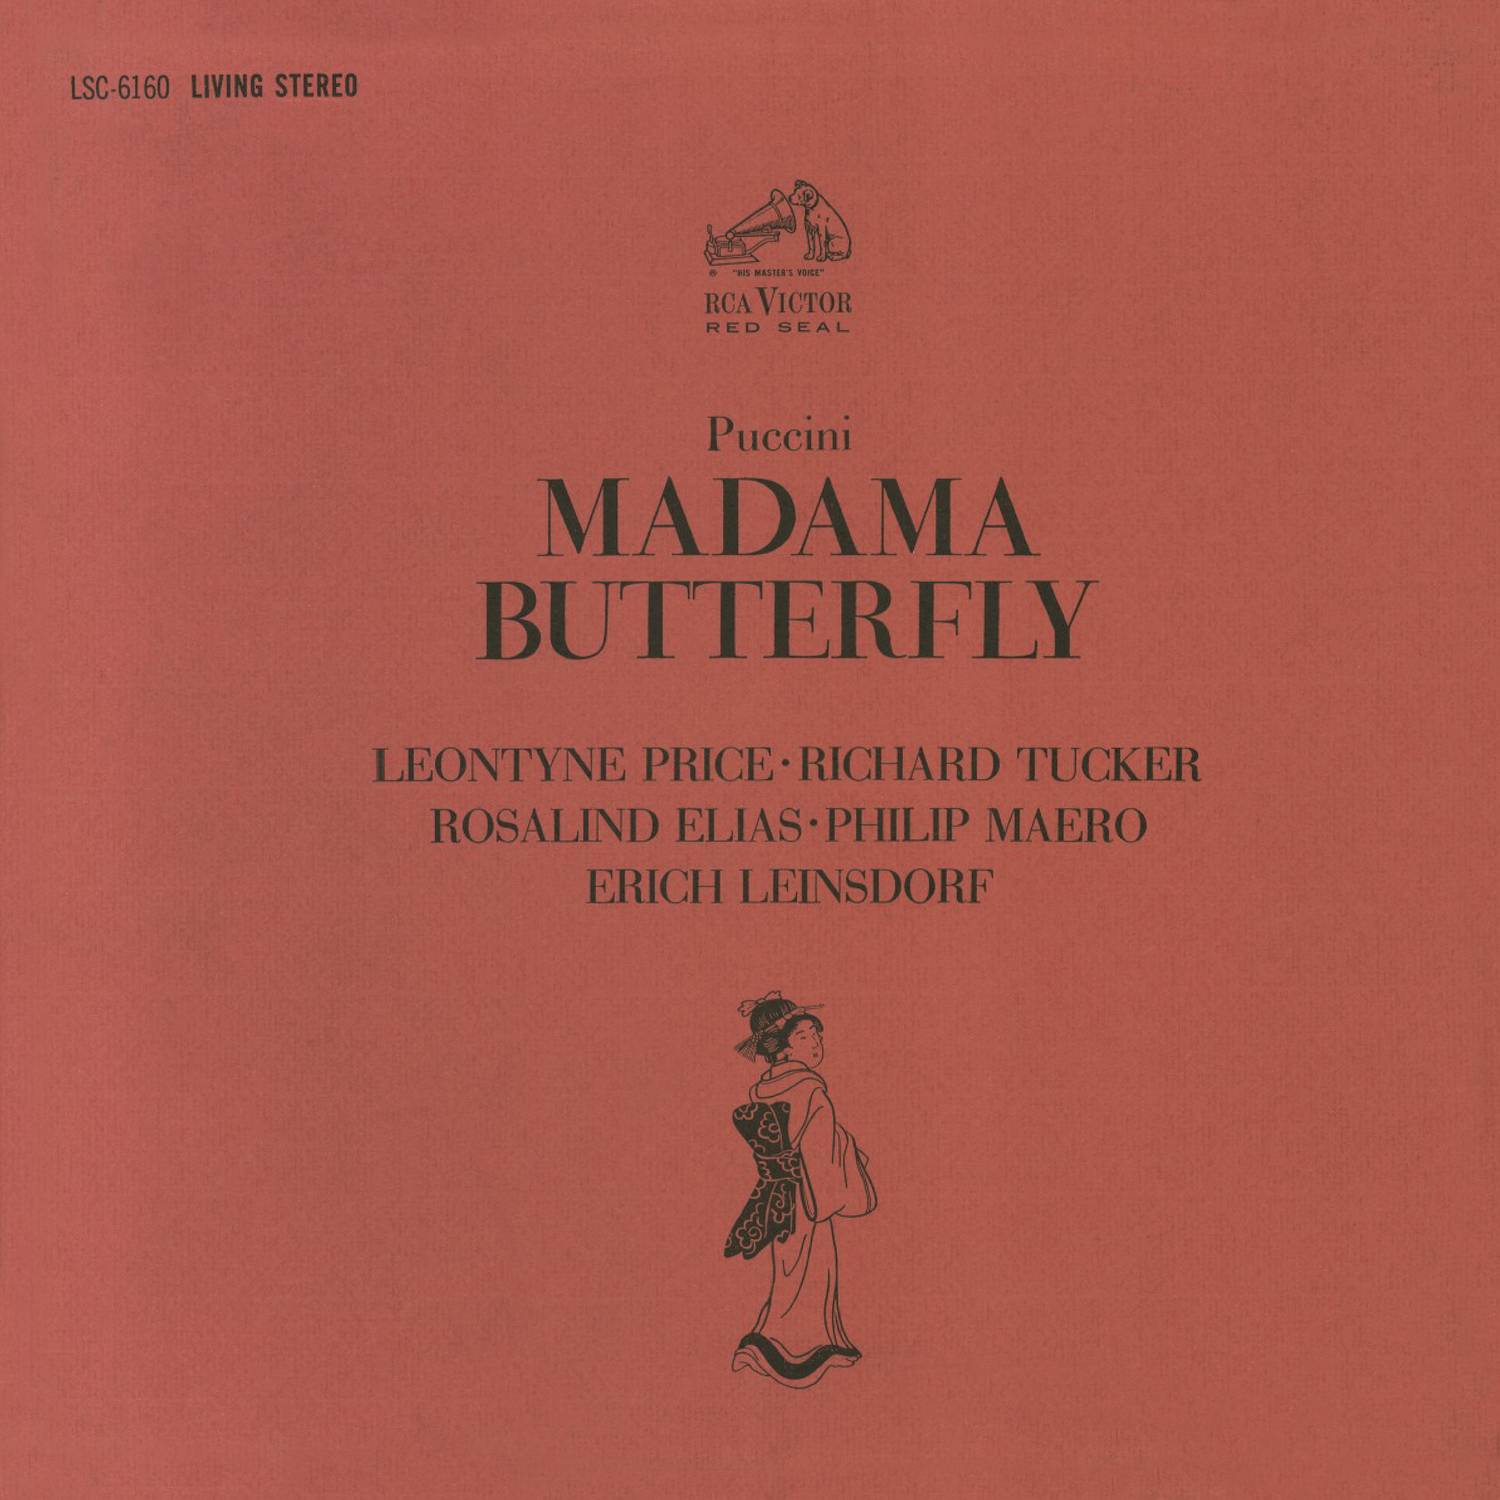 Madama Butterfly Remastered: Act III  Gia il sole!